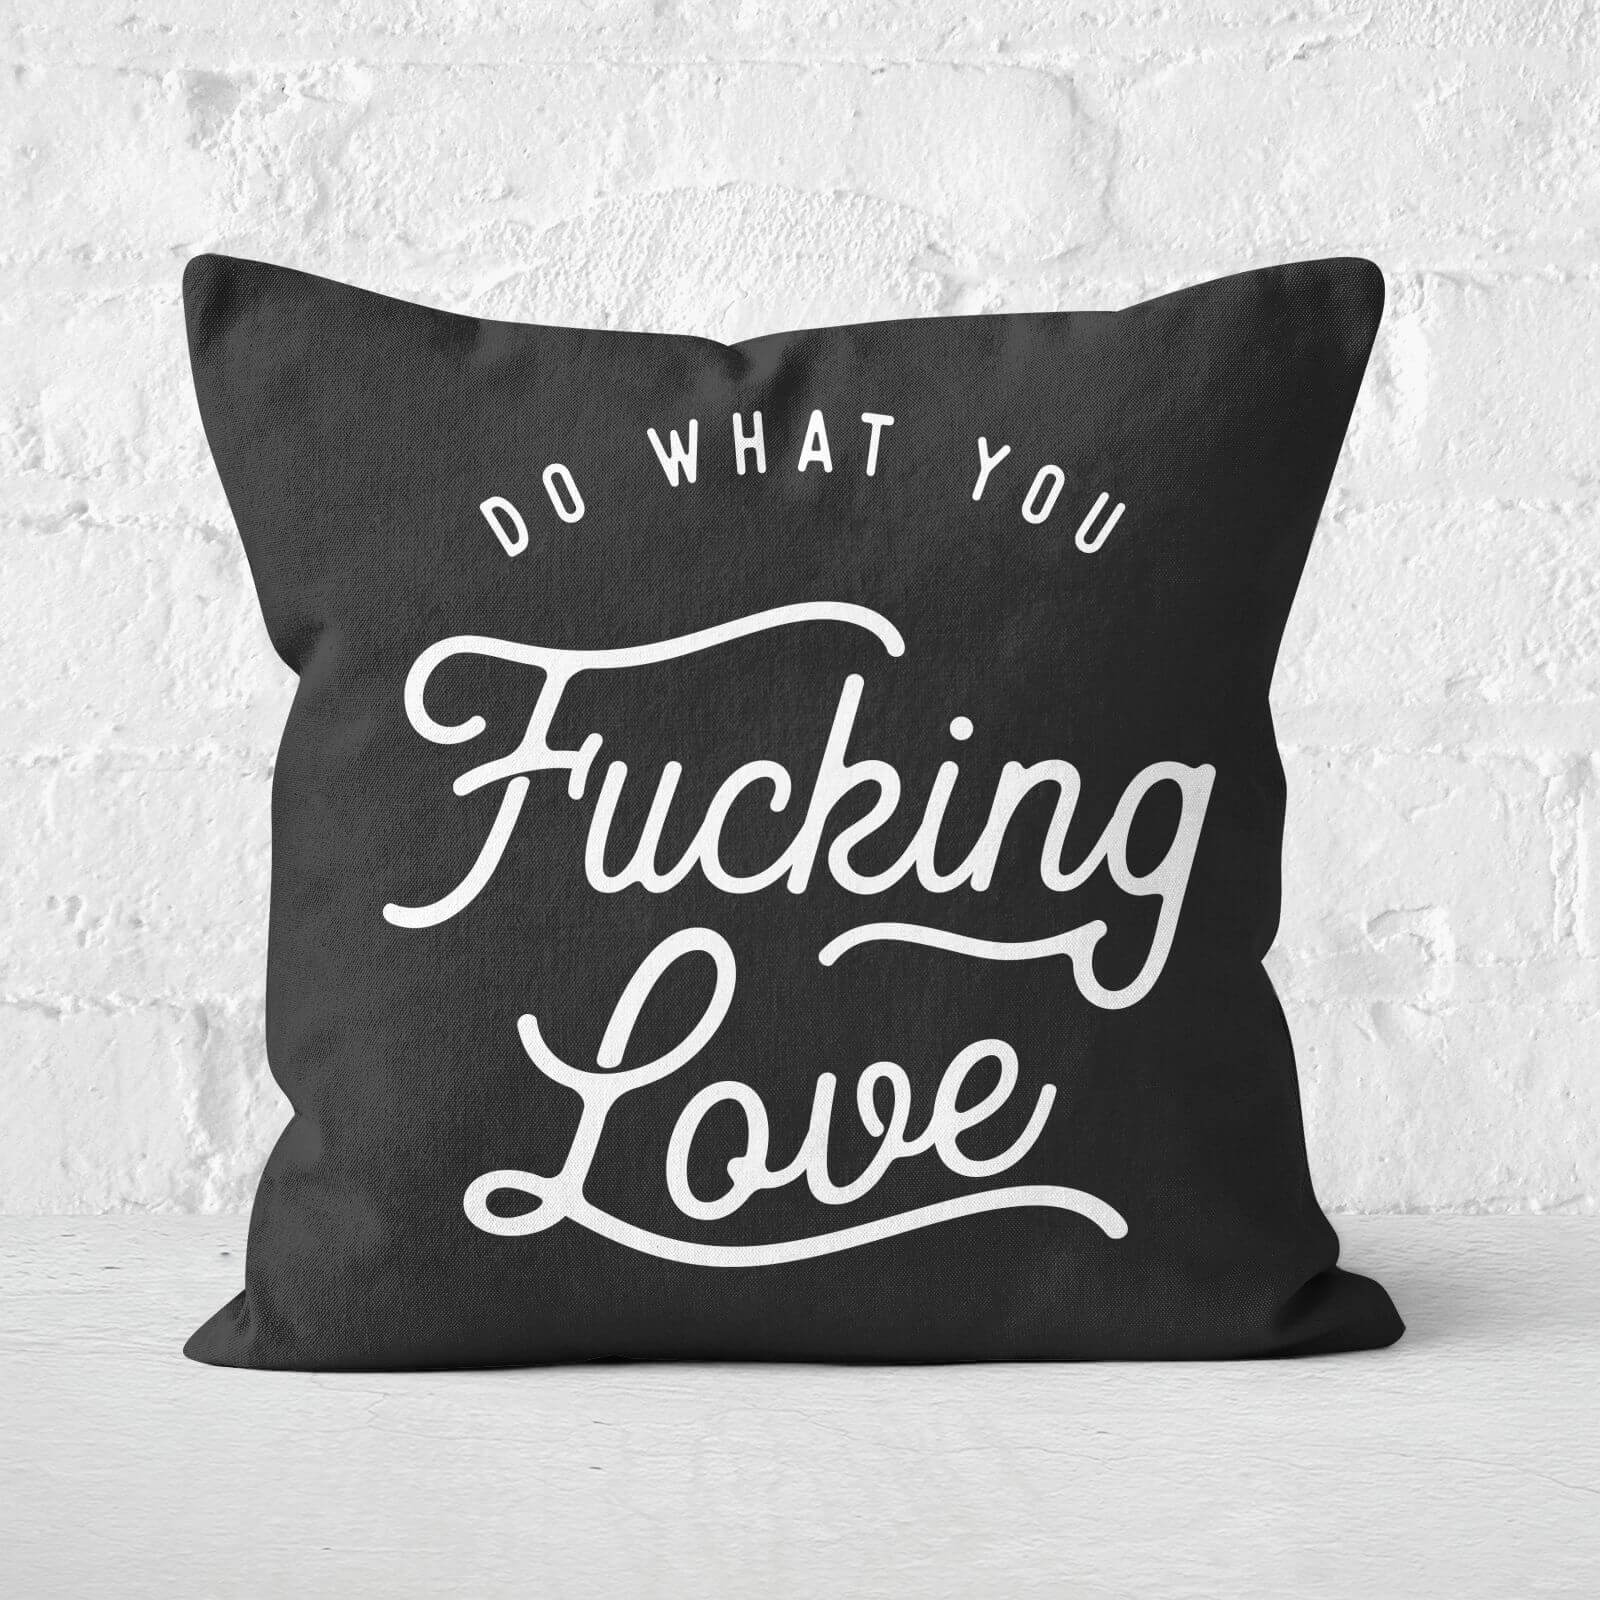 The Motivated Type Do What You Fucking Love Square Cushion - 60x60cm - Soft Touch